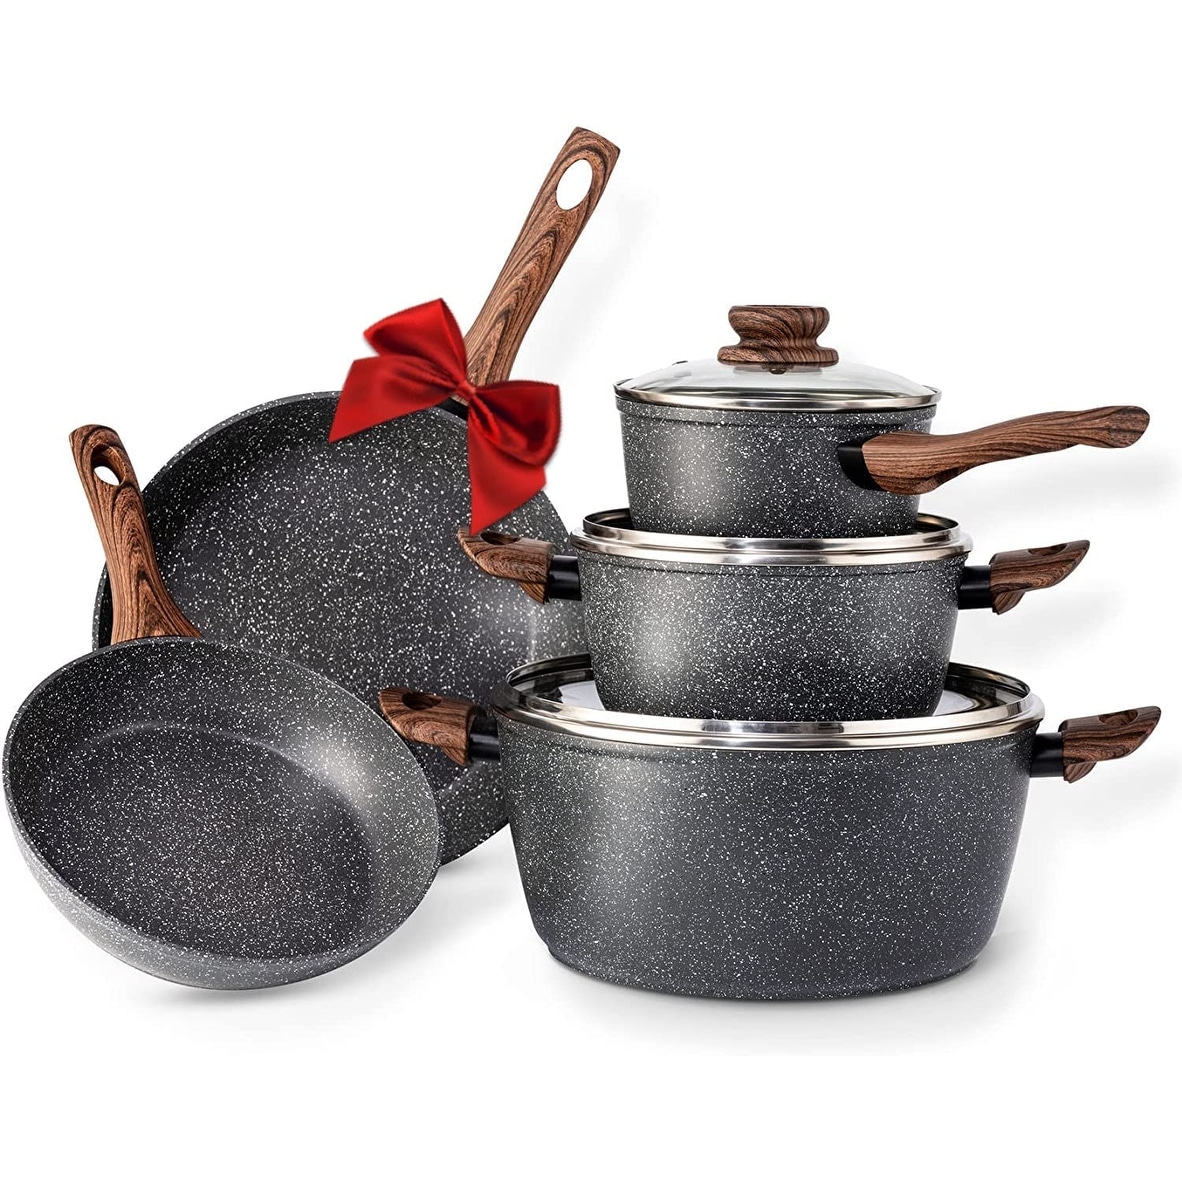 NewHome Non-Stick Granite Cookware Set Kitchen Induction Pots Pans